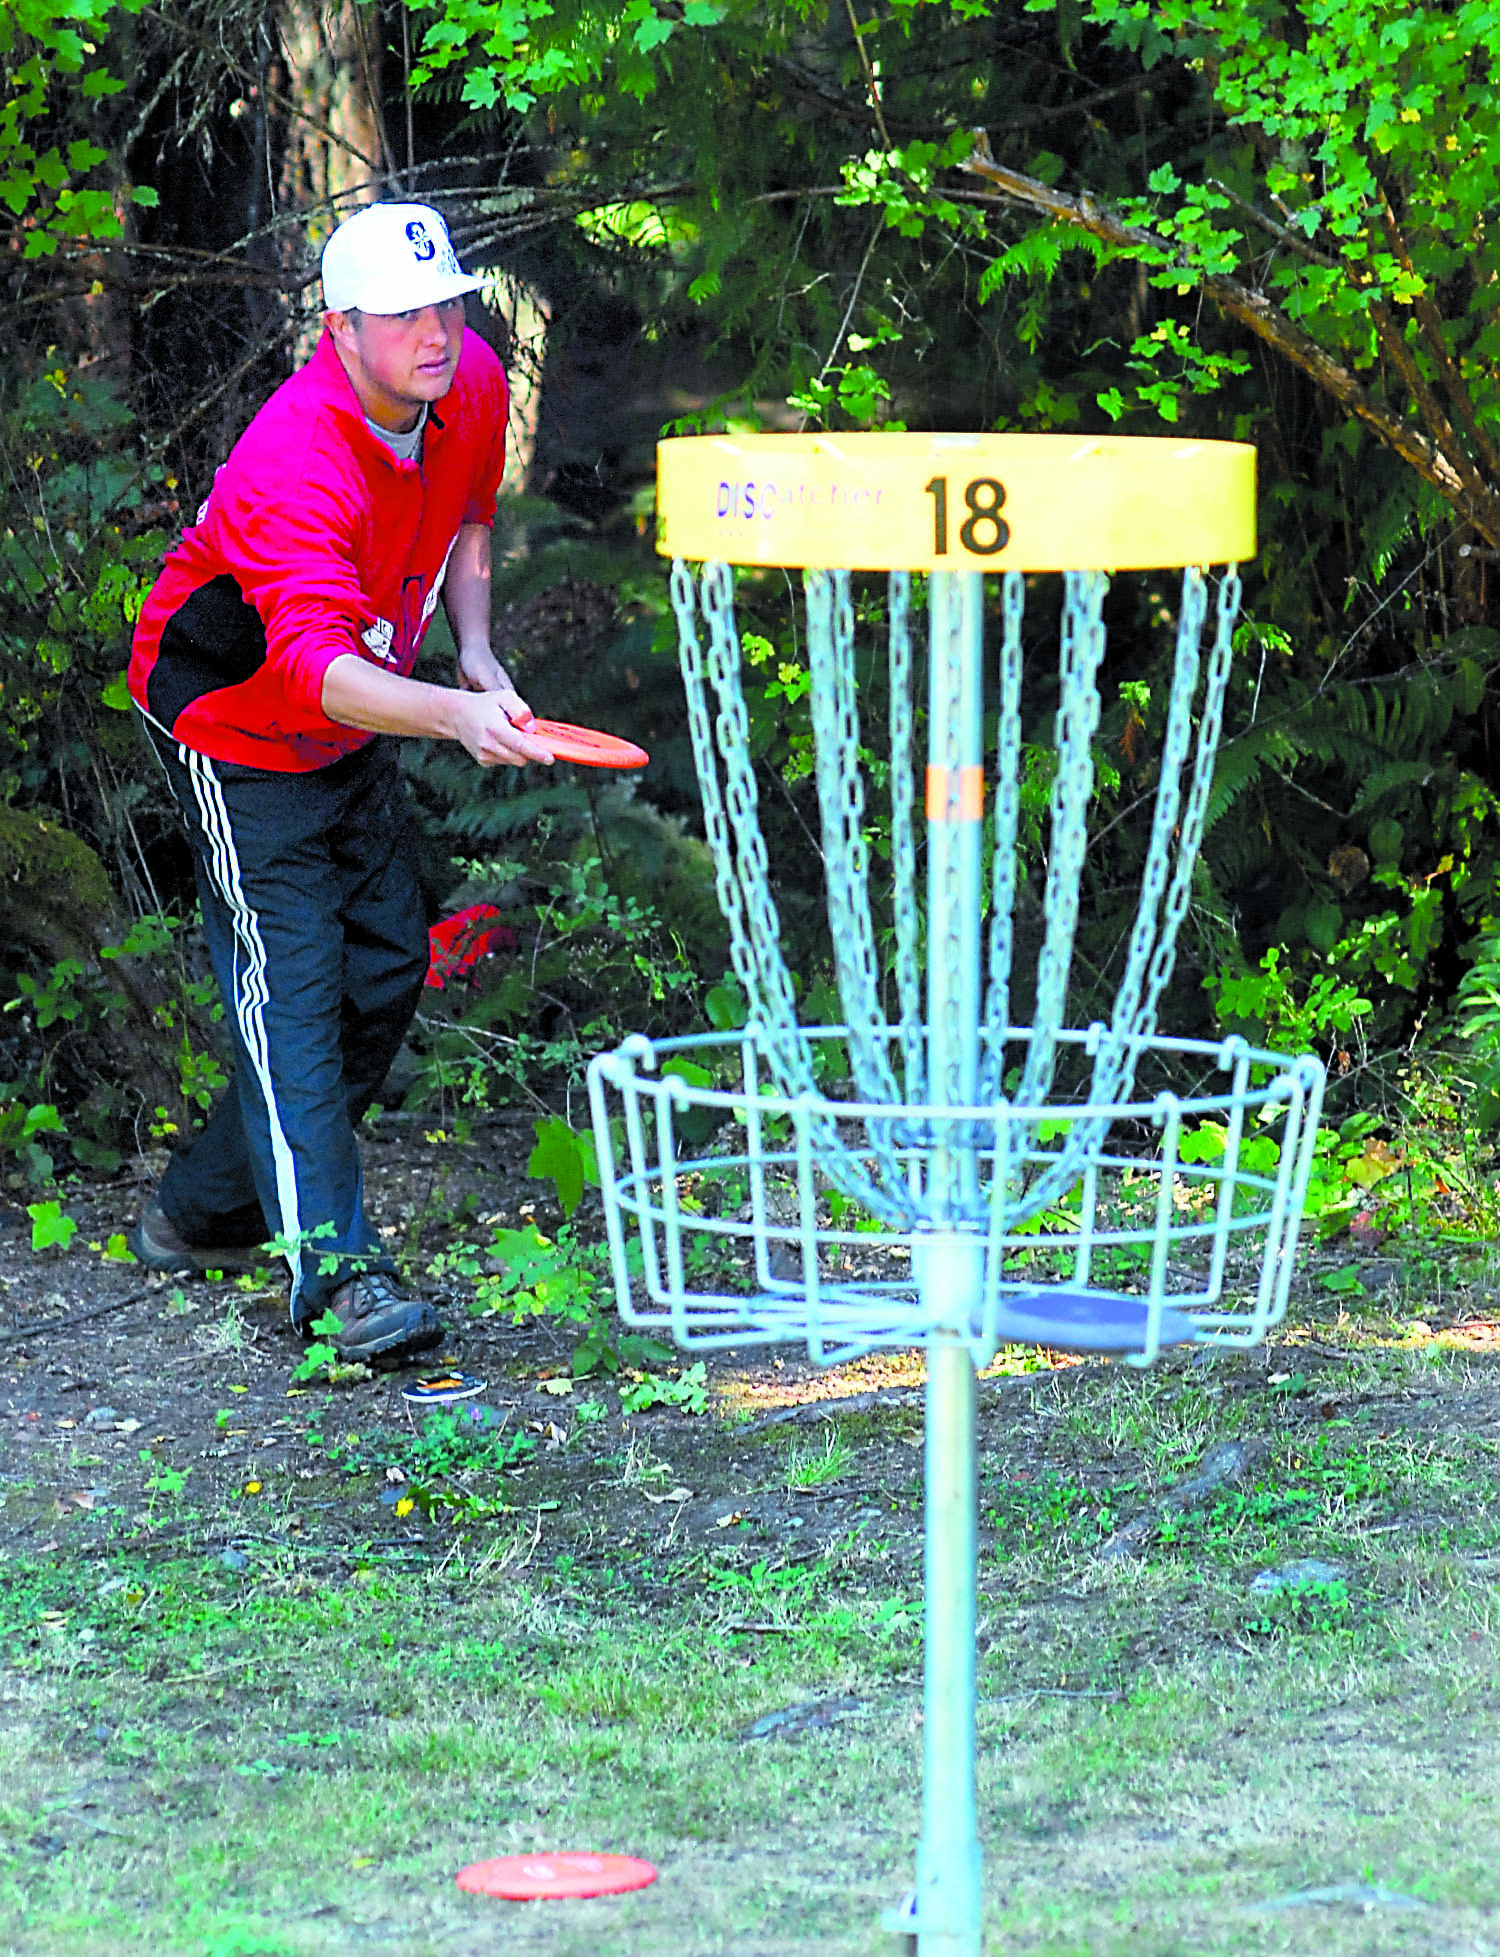 Adam Mackay of rural Port Angeles takes aim at the basket on the 18th hole of the disc golf course at Lincoln Park in Port Angeles on Saturday. Keith Thorpe/Peninsula Daily News